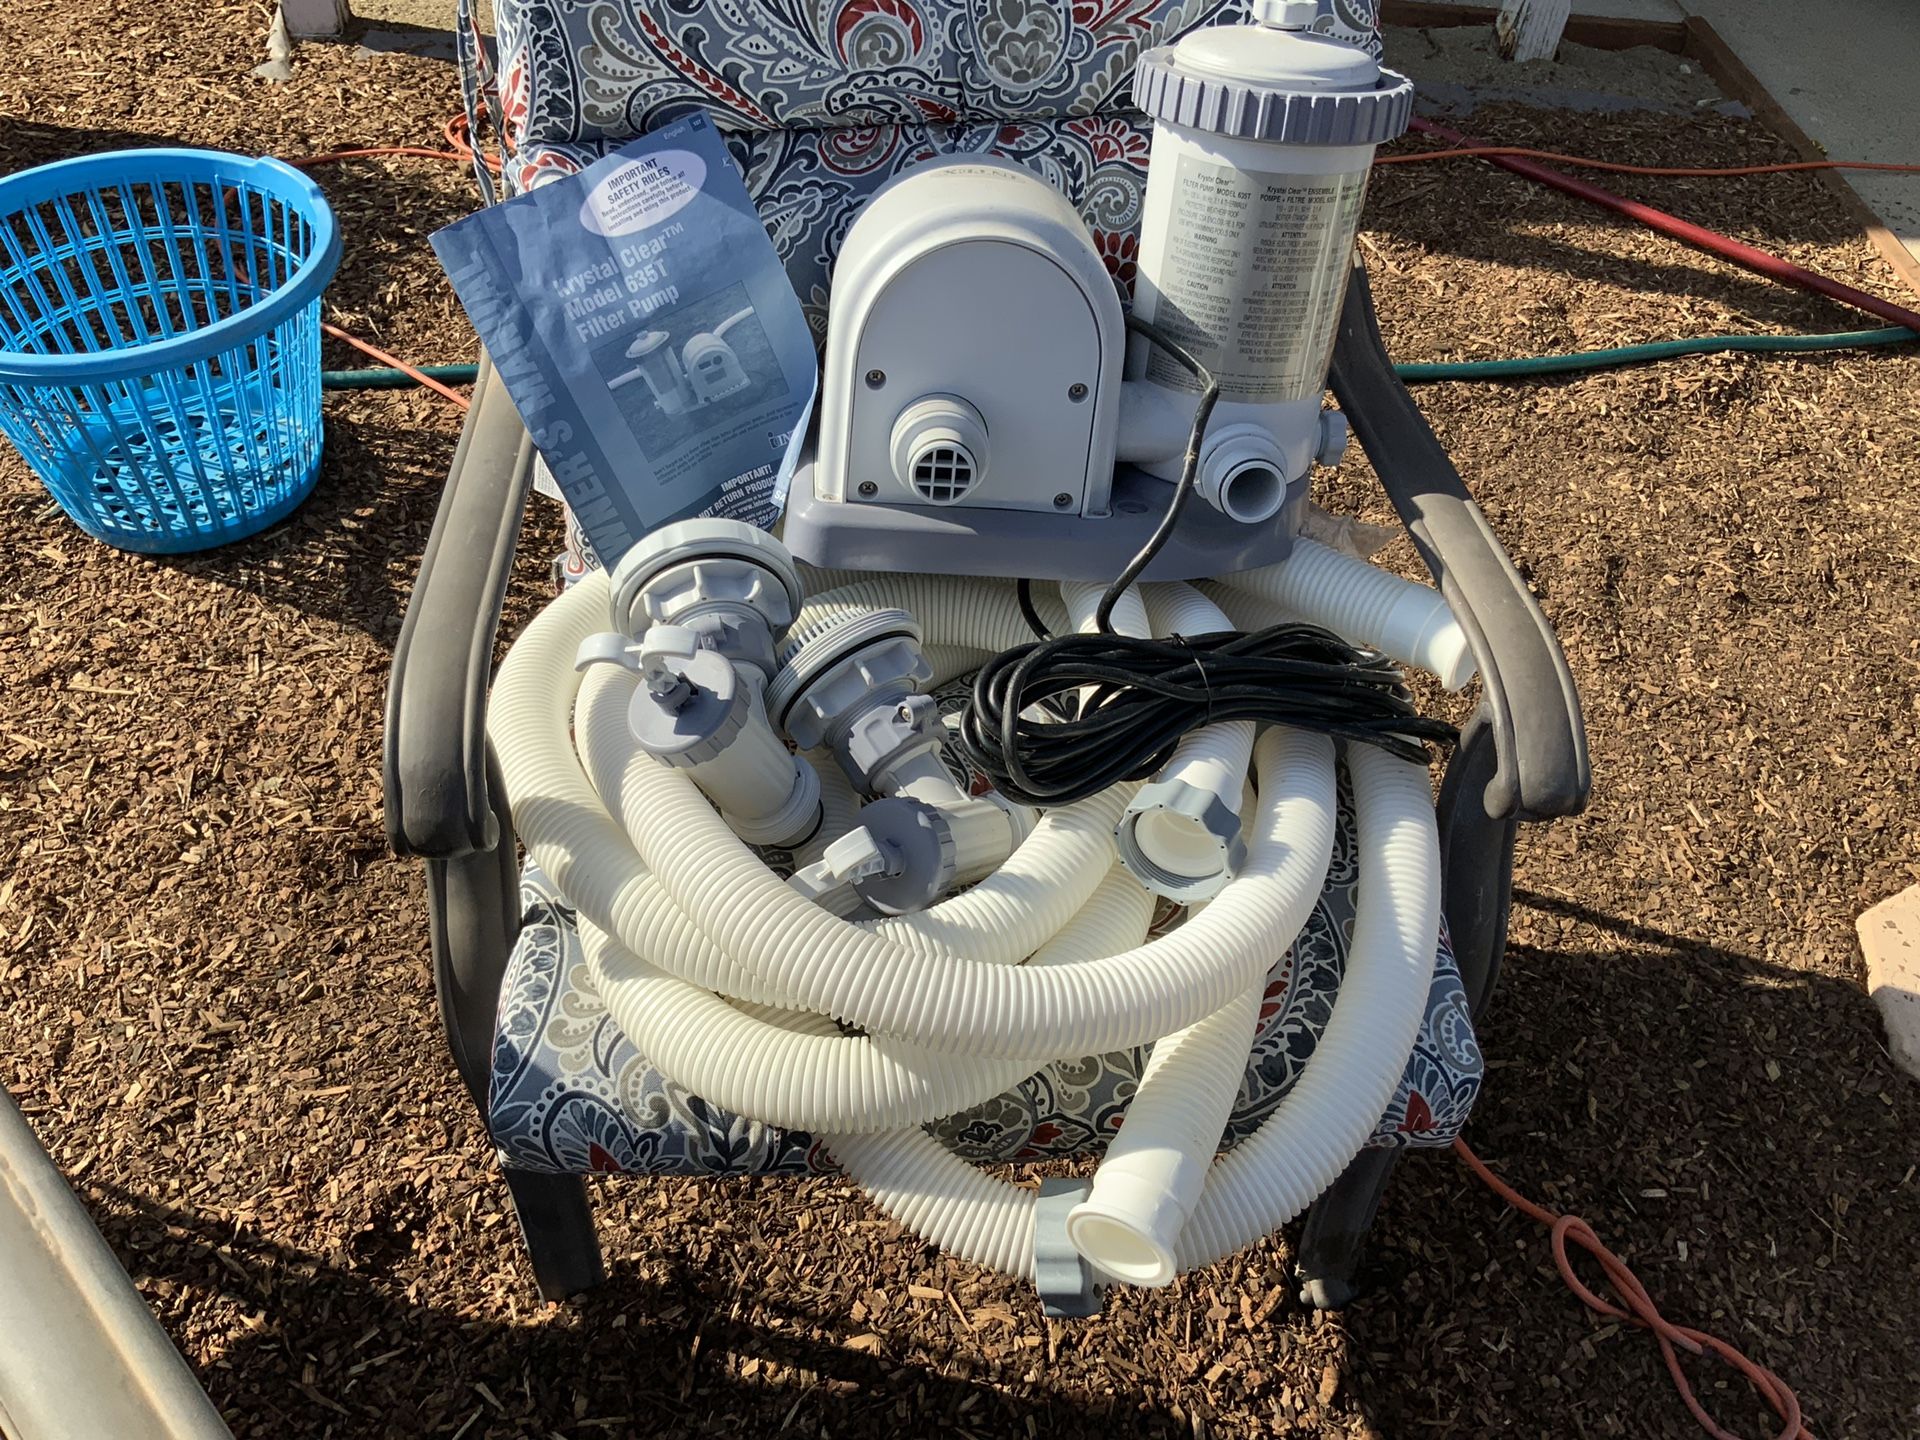 Lowe’s new above ground pool pump, 2 filters